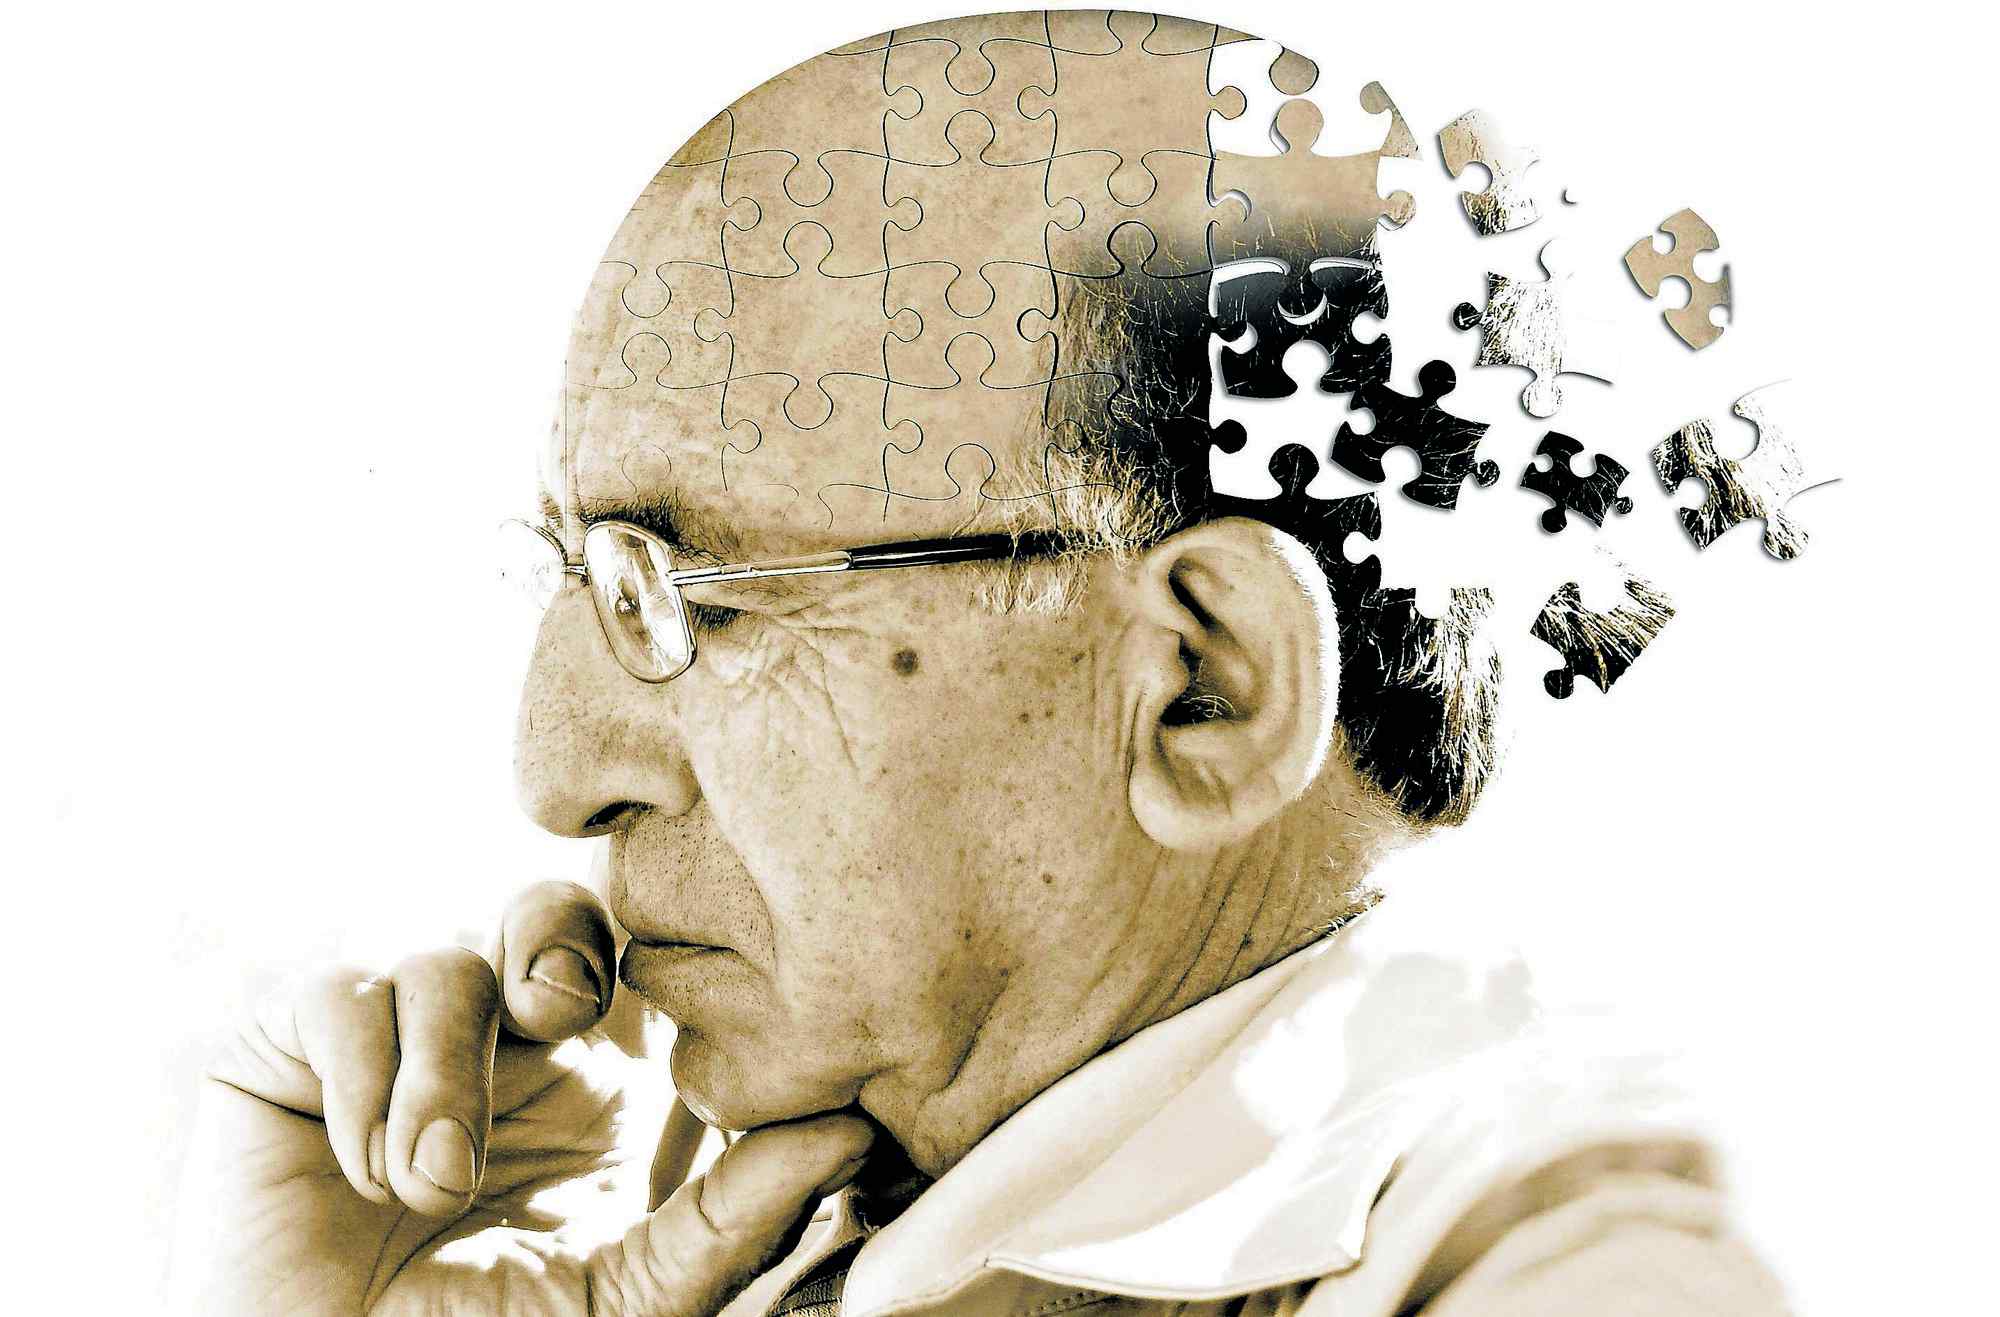 Man with Alzheimer's Disease and missing puzzle peices on his head